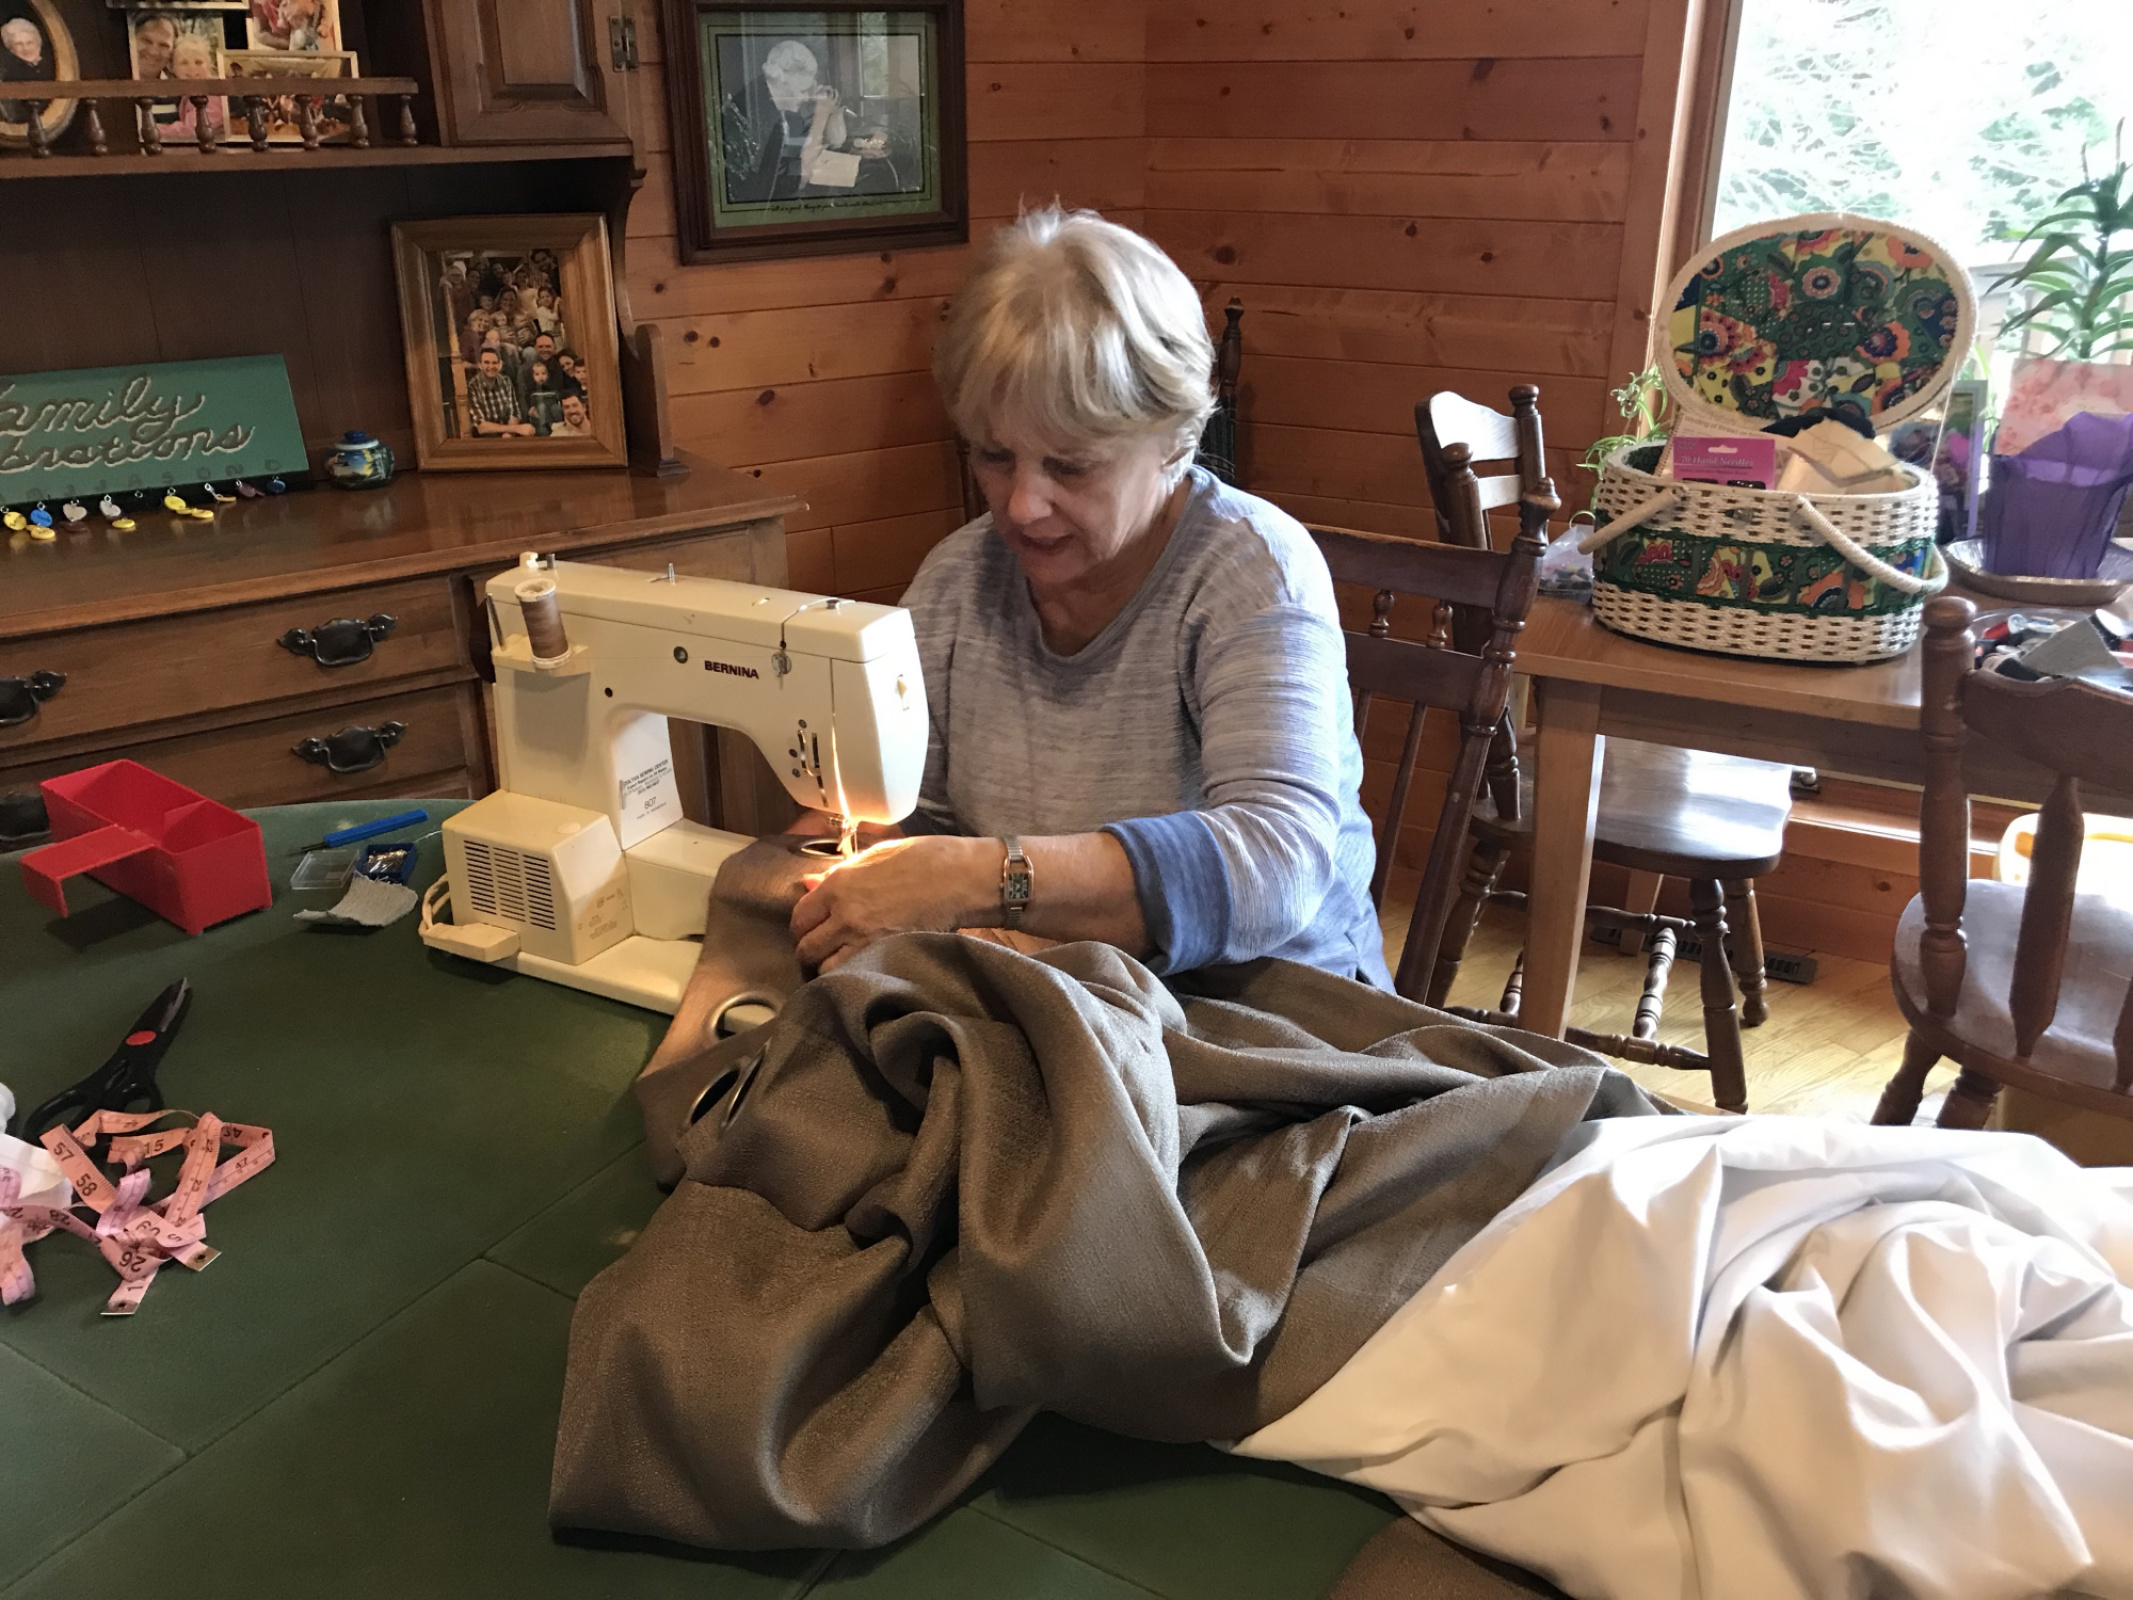 Sister-in-love Jeannie sews drapes for our office/bedroom.